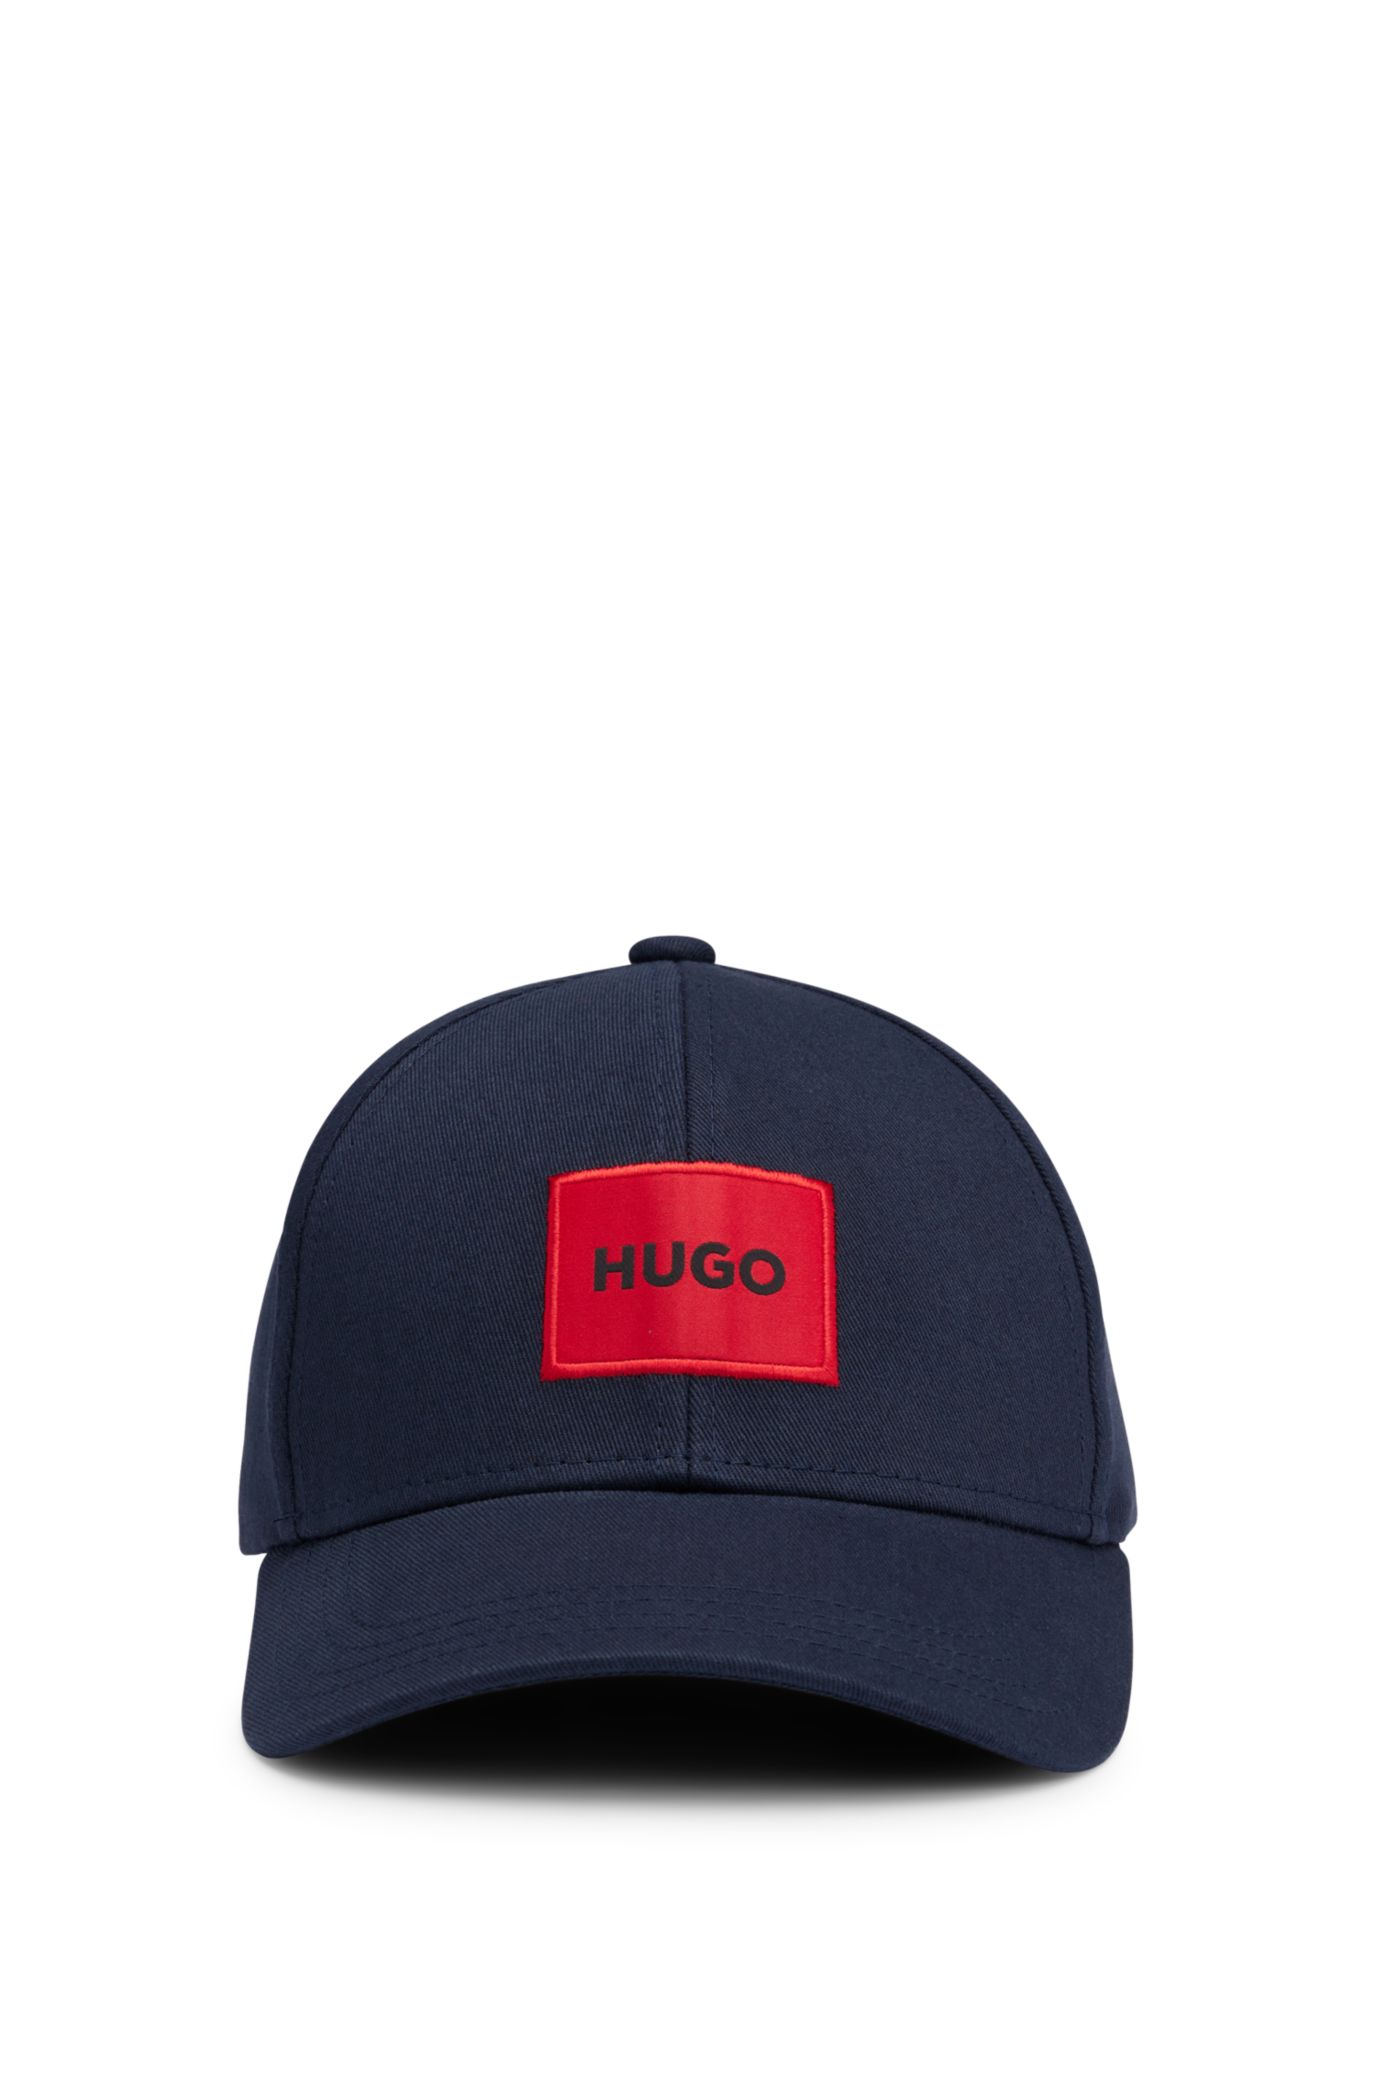 cap HUGO logo red Cotton-twill - with label